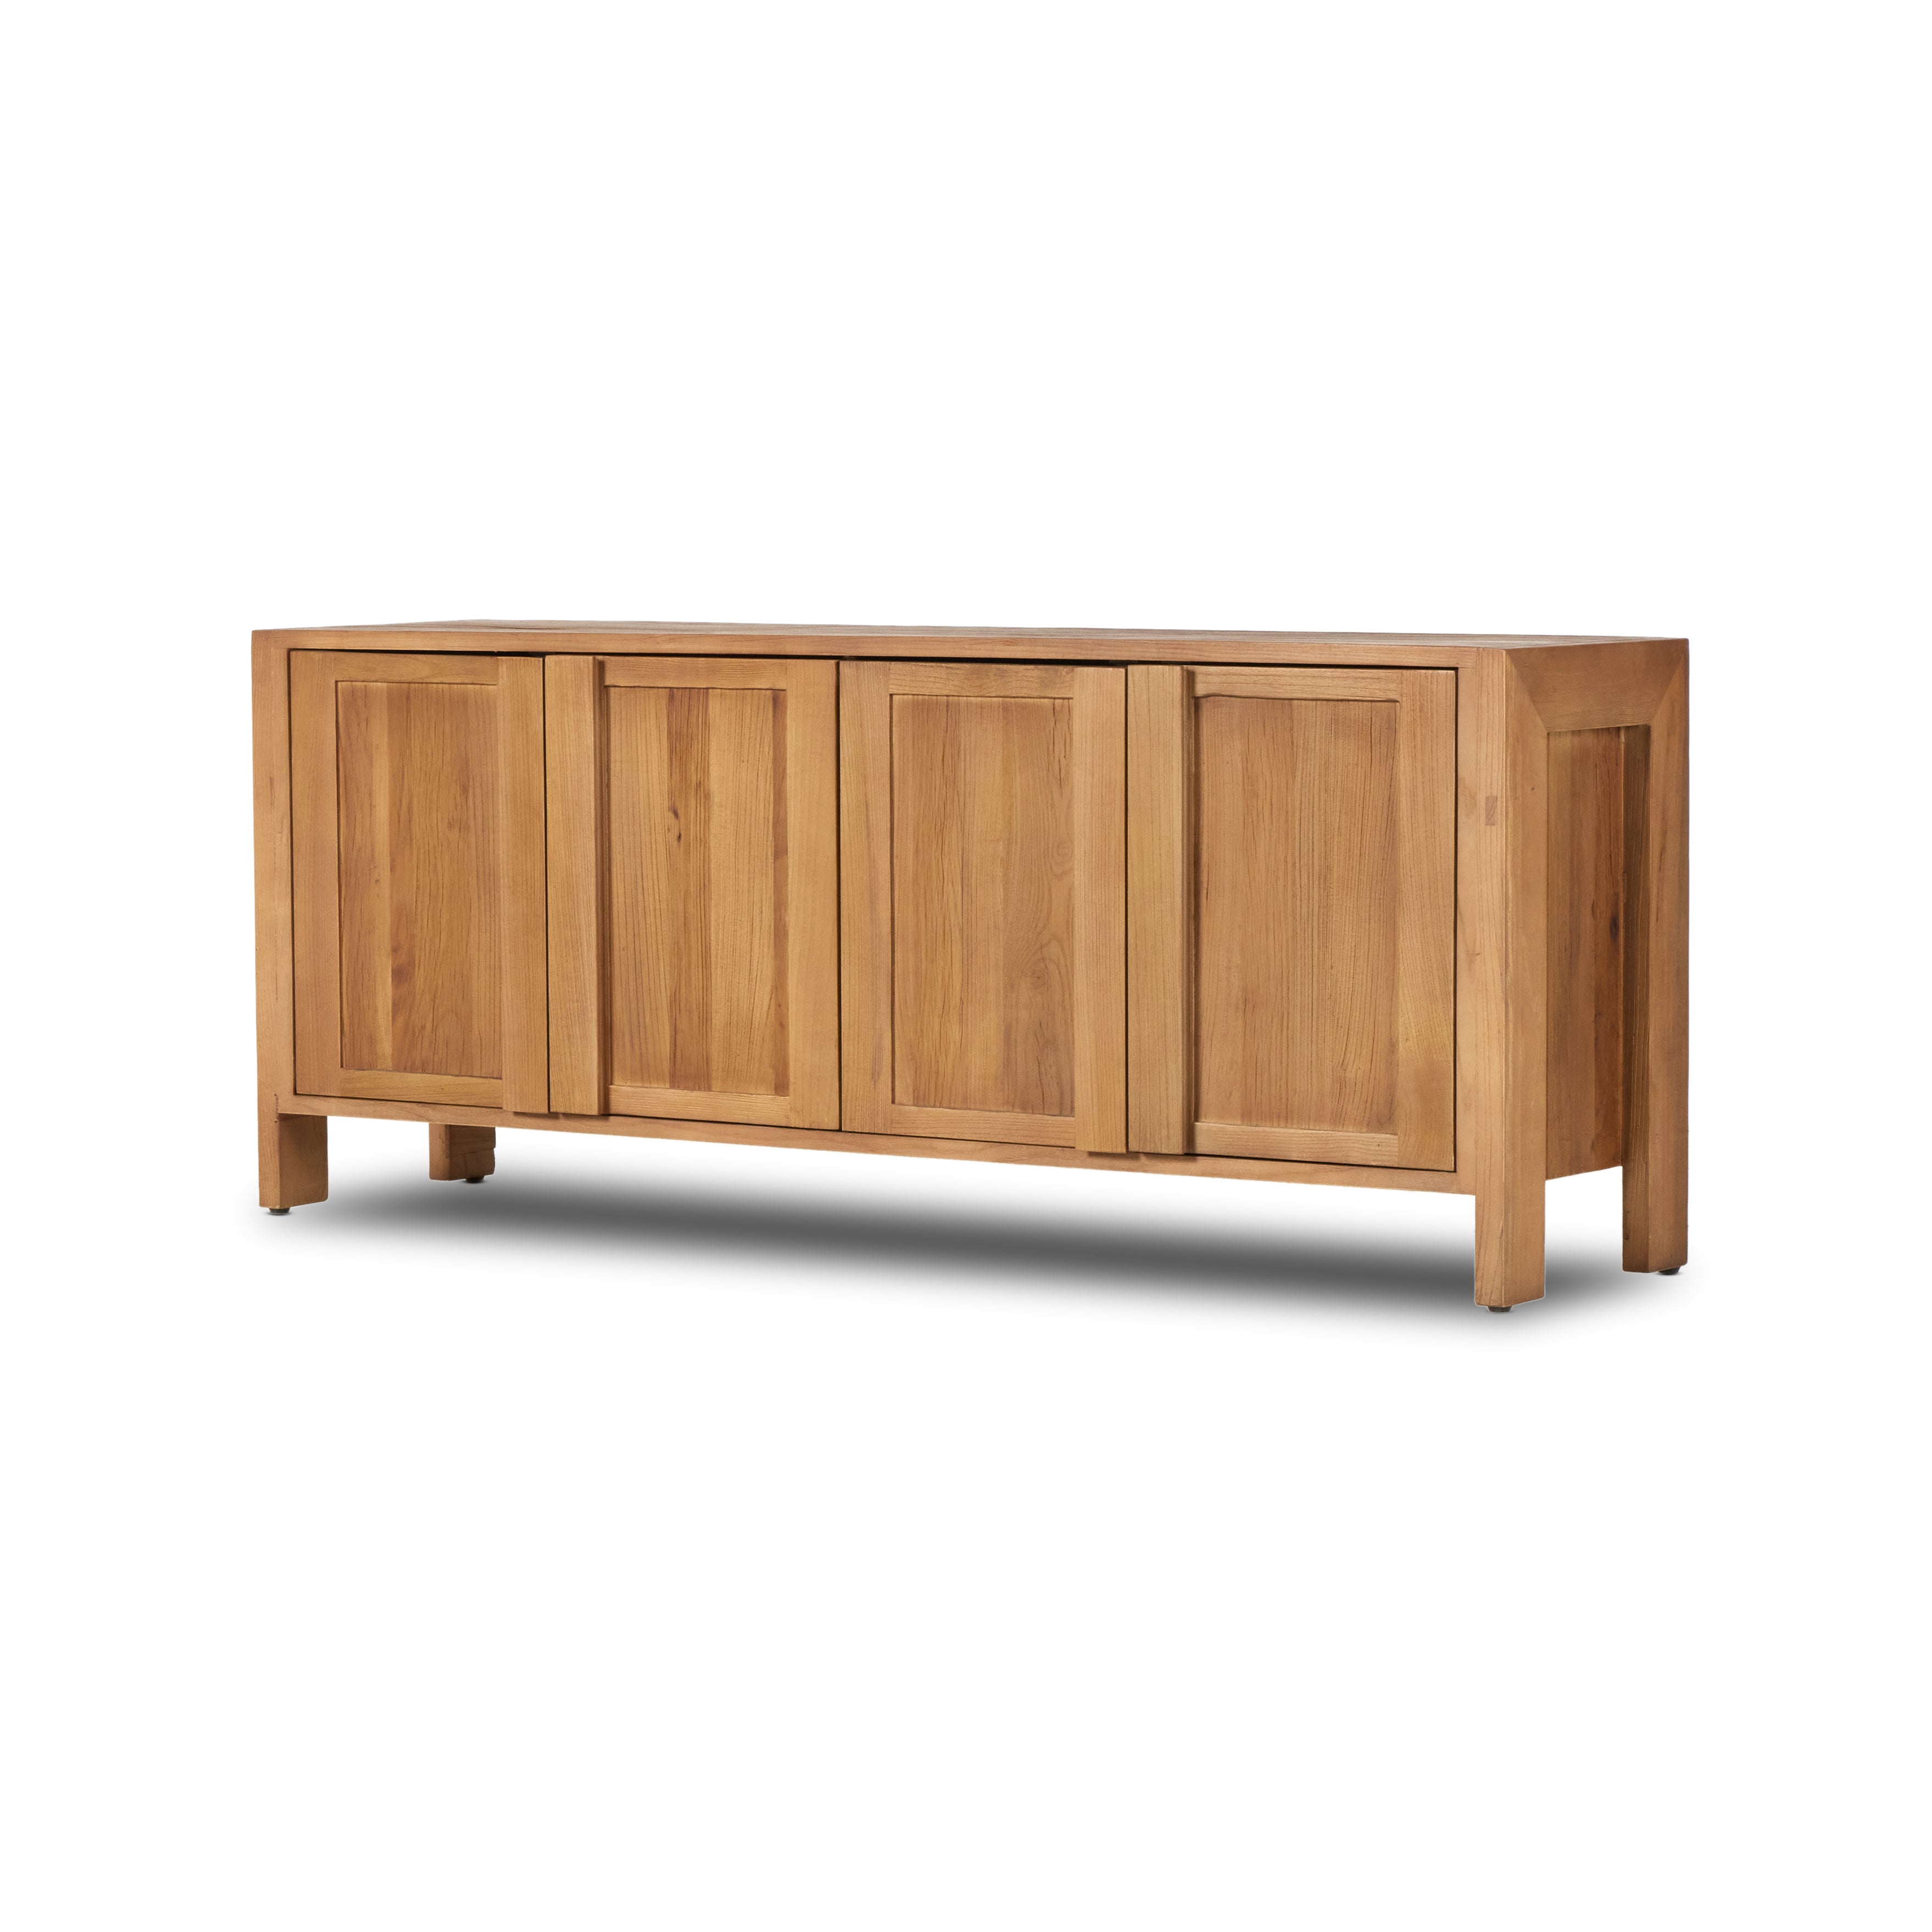 Inspired by Swedish folk design, natural elm crafts the frame and panel structure of this sideboard. Designed without hardware, the raised panels of the doors have a cutout to serve as handles, offering a clean appearance that offers practical function. Amethyst Home provides interior design, new construction, custom furniture, and area rugs in the Des Moines metro area.